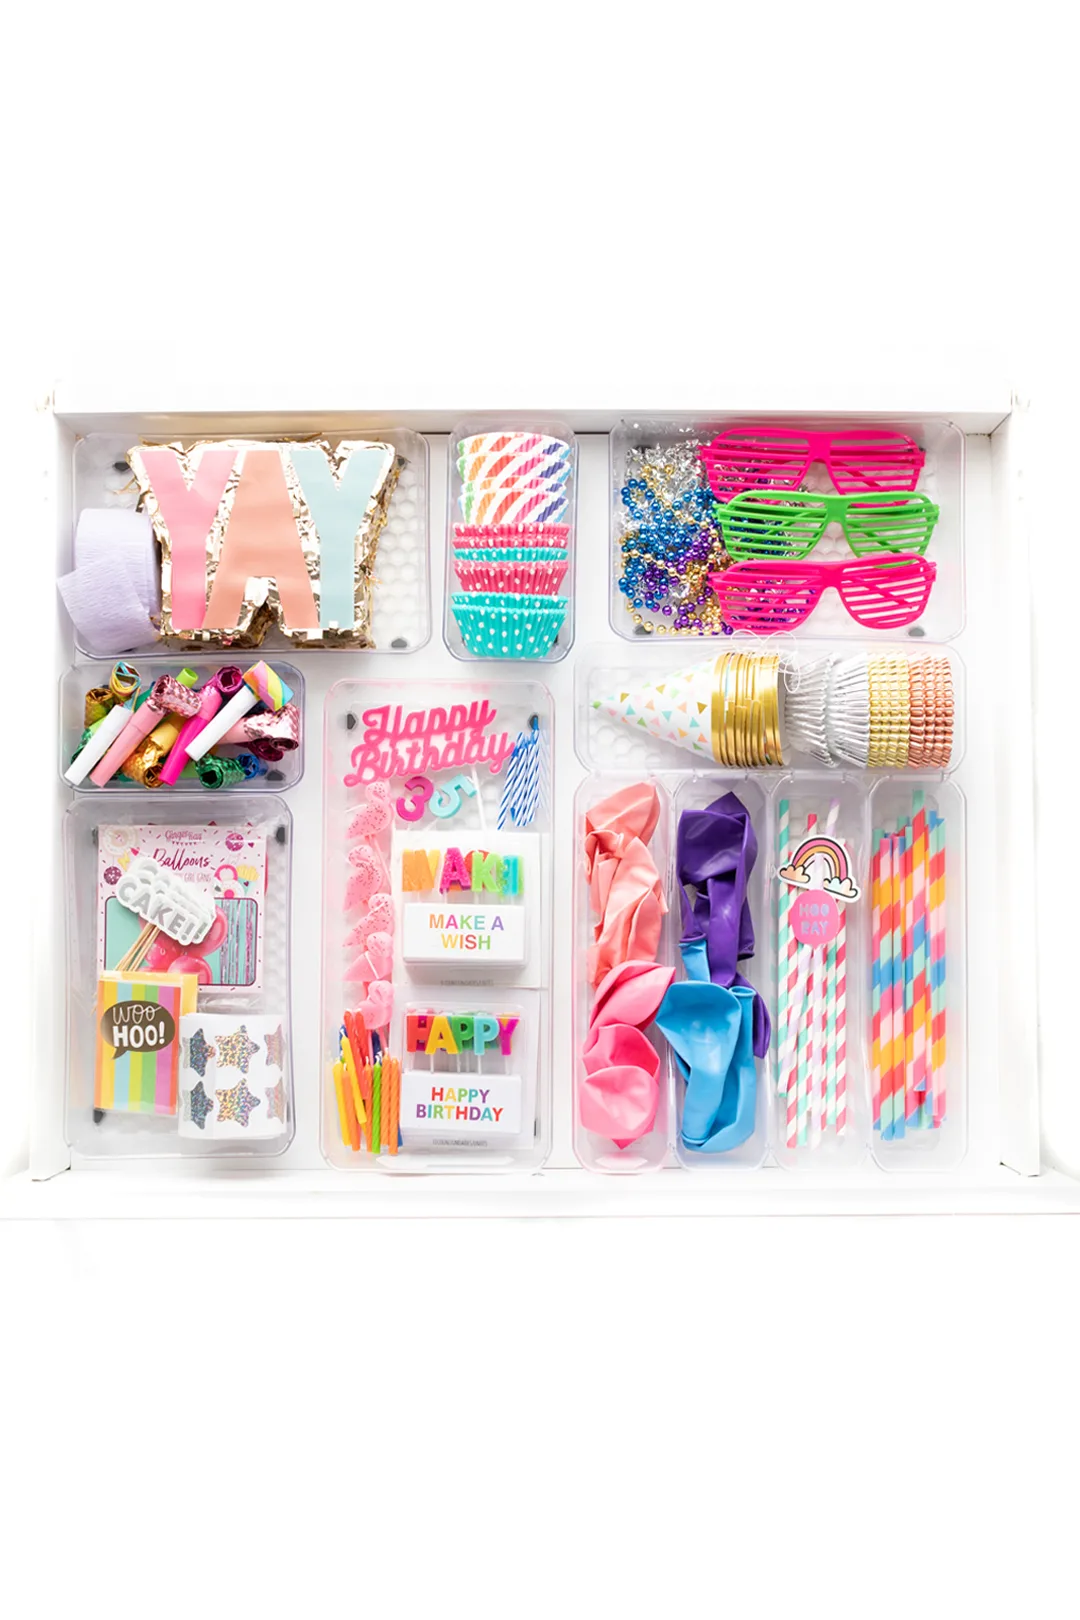 inside view of a celebration drawer. Party supply drawer instead of a junk drawer. Filled with common and basic party supplies for everyday celebrations.